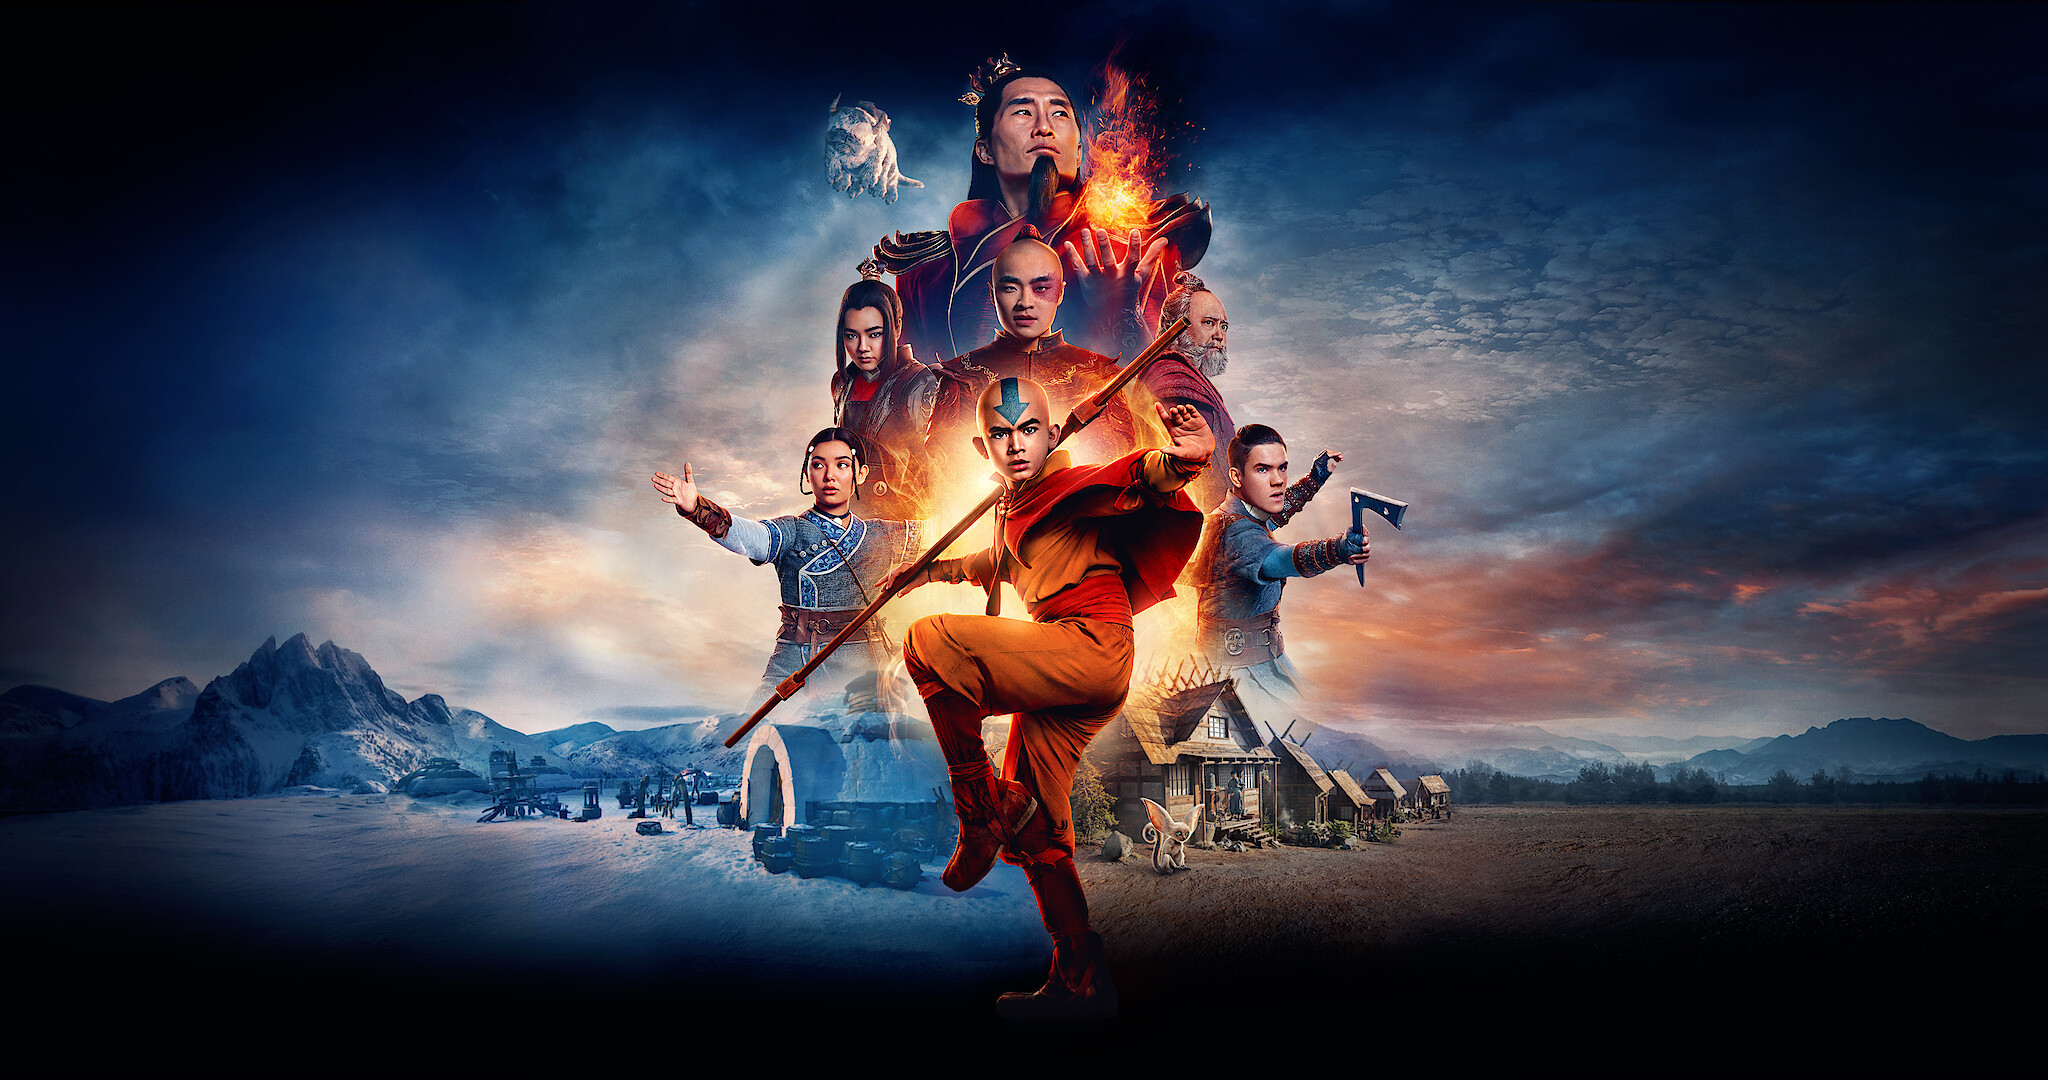 The cast of 'Avatar: The Last Airbender'